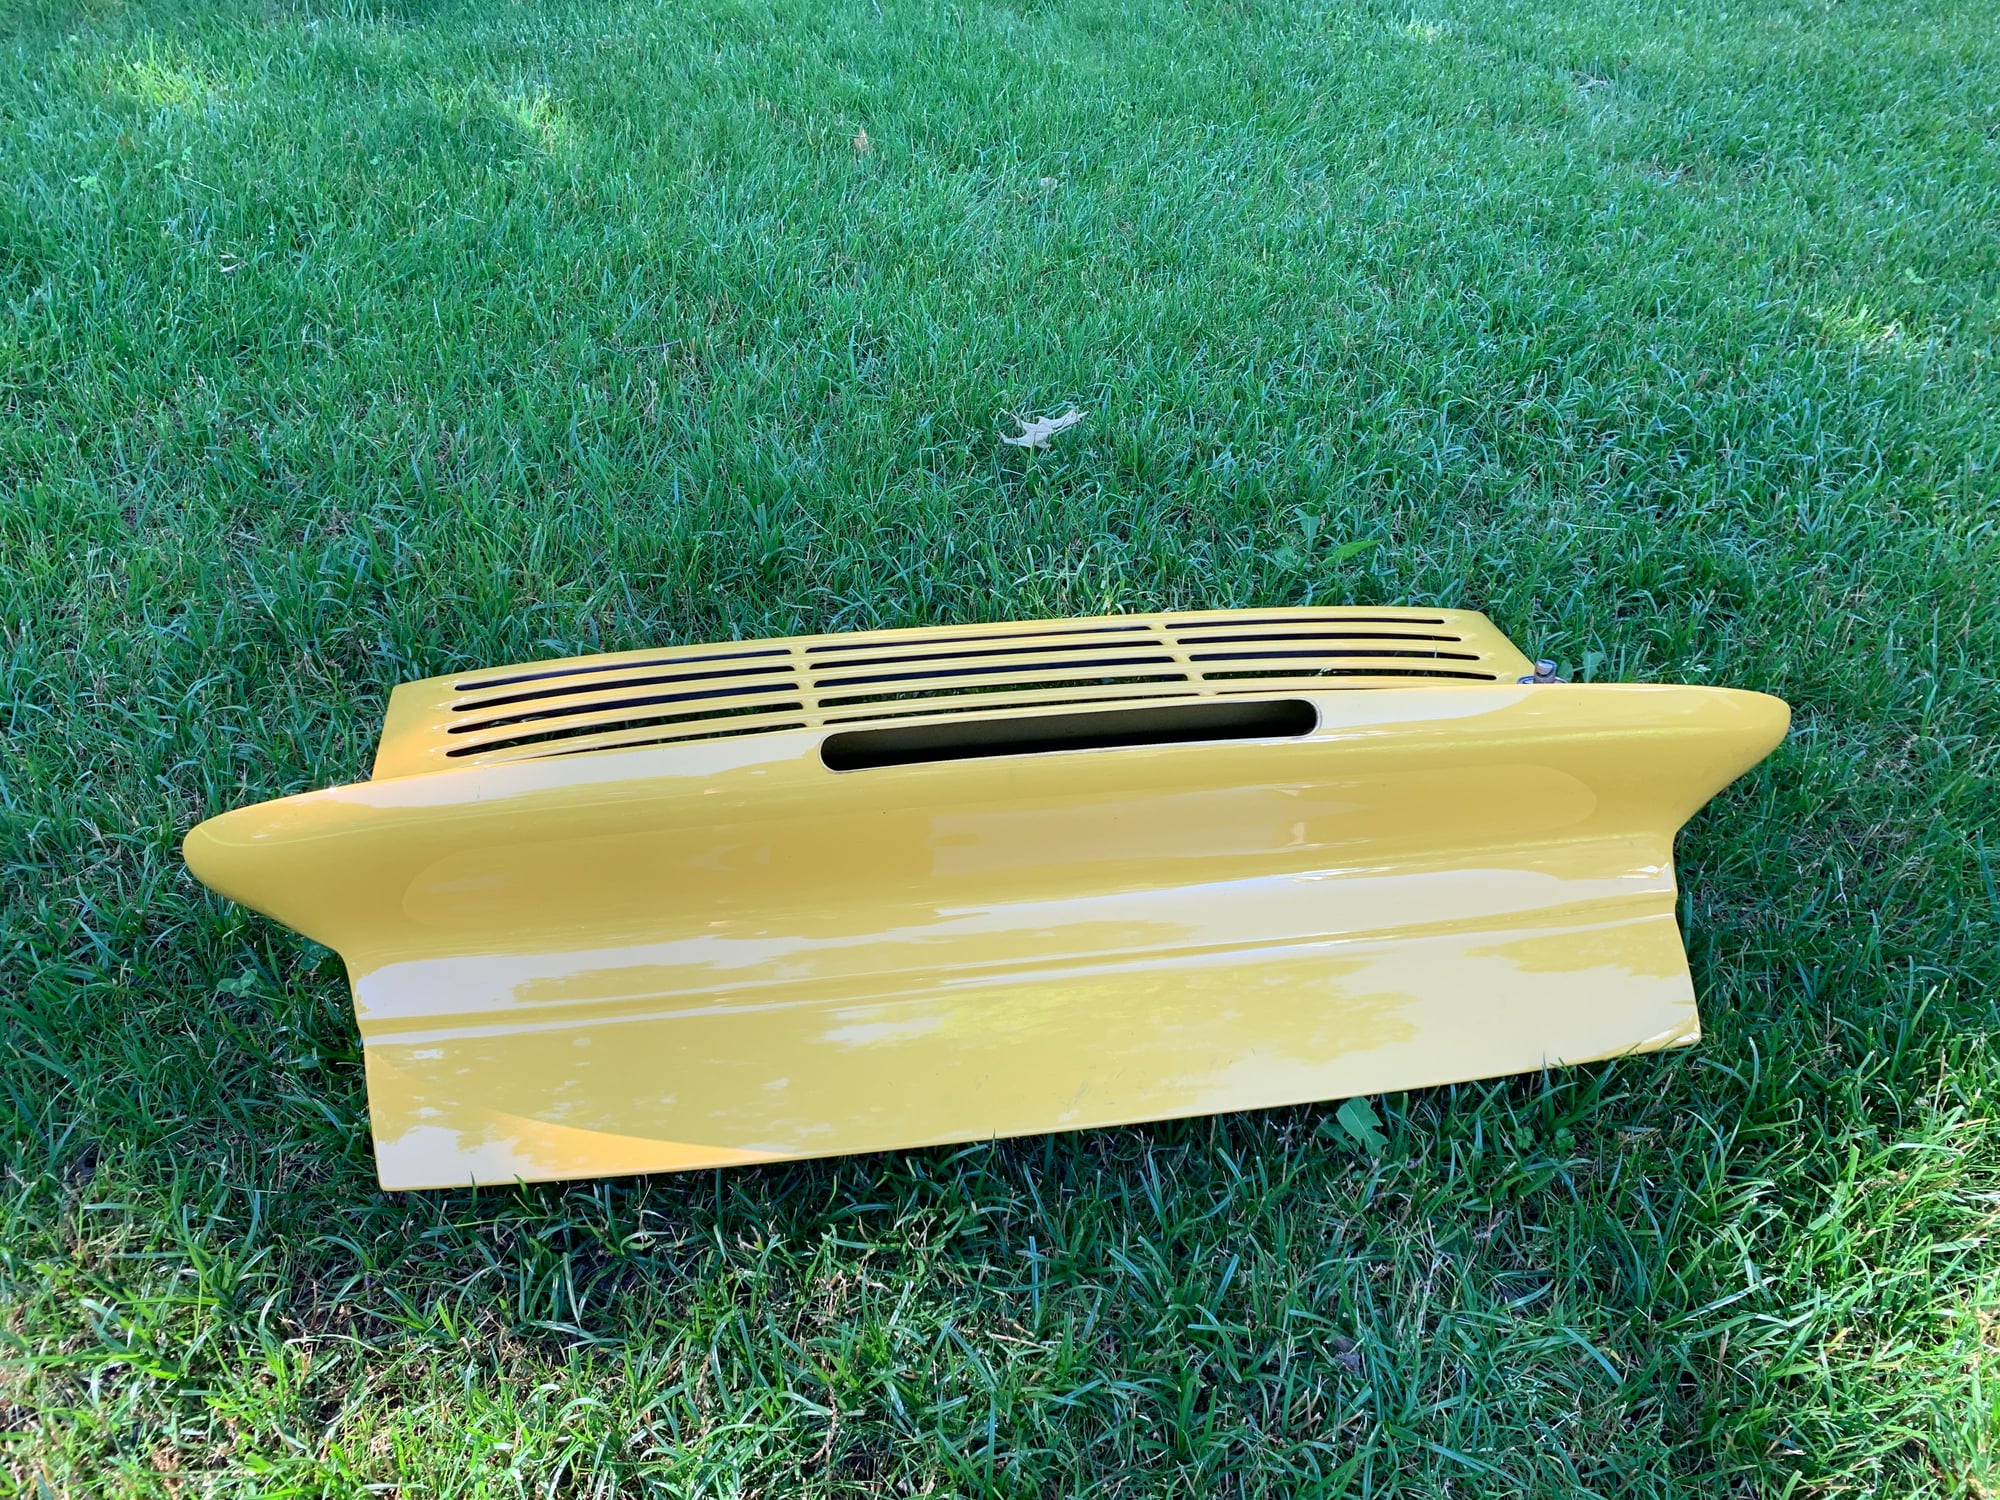 Exterior Body Parts - 996 Turbo deck lid - Used - 2001 to 2005 Porsche 911 - Sewell, NJ 08080, United States